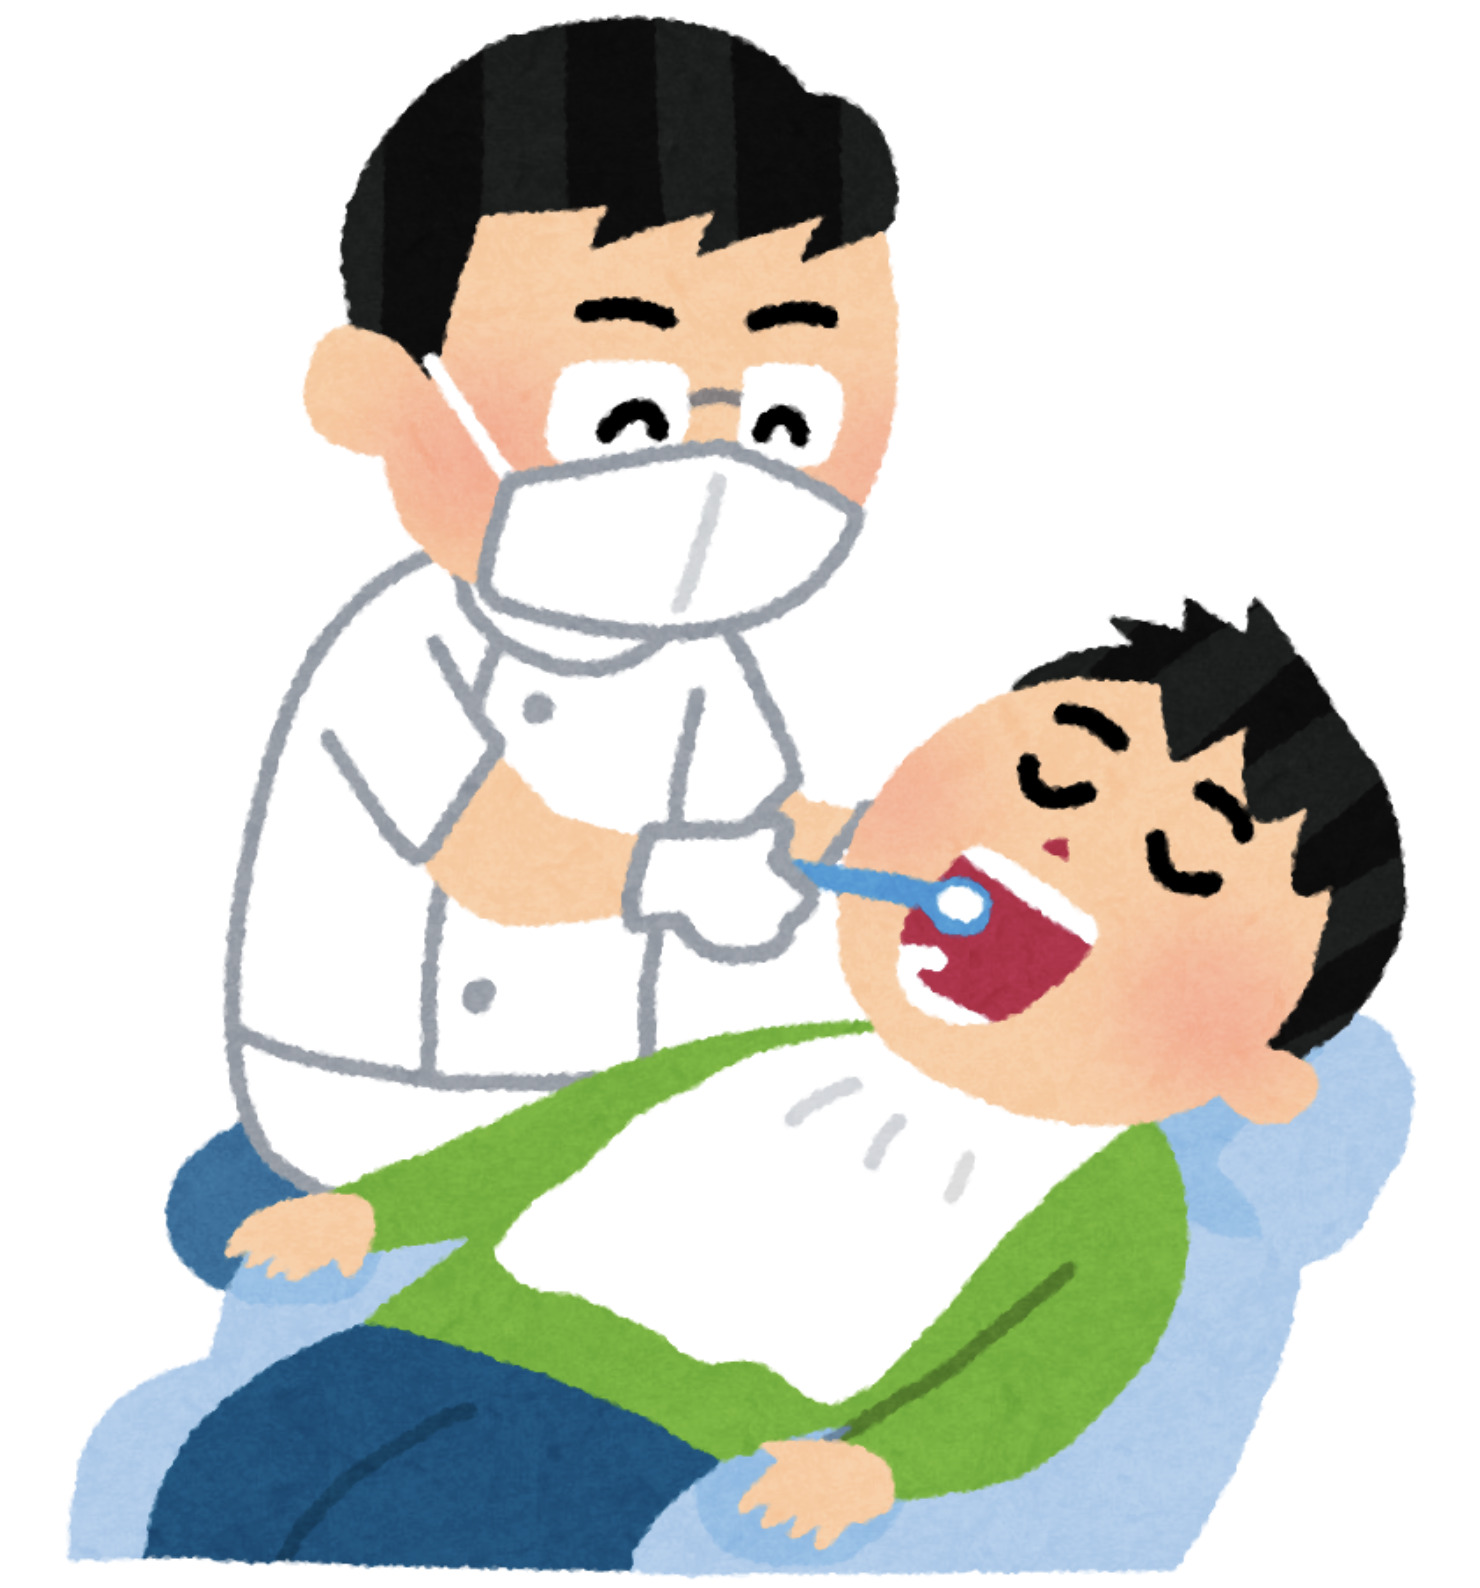 Why are there more dentists than convenience stores in Japan?